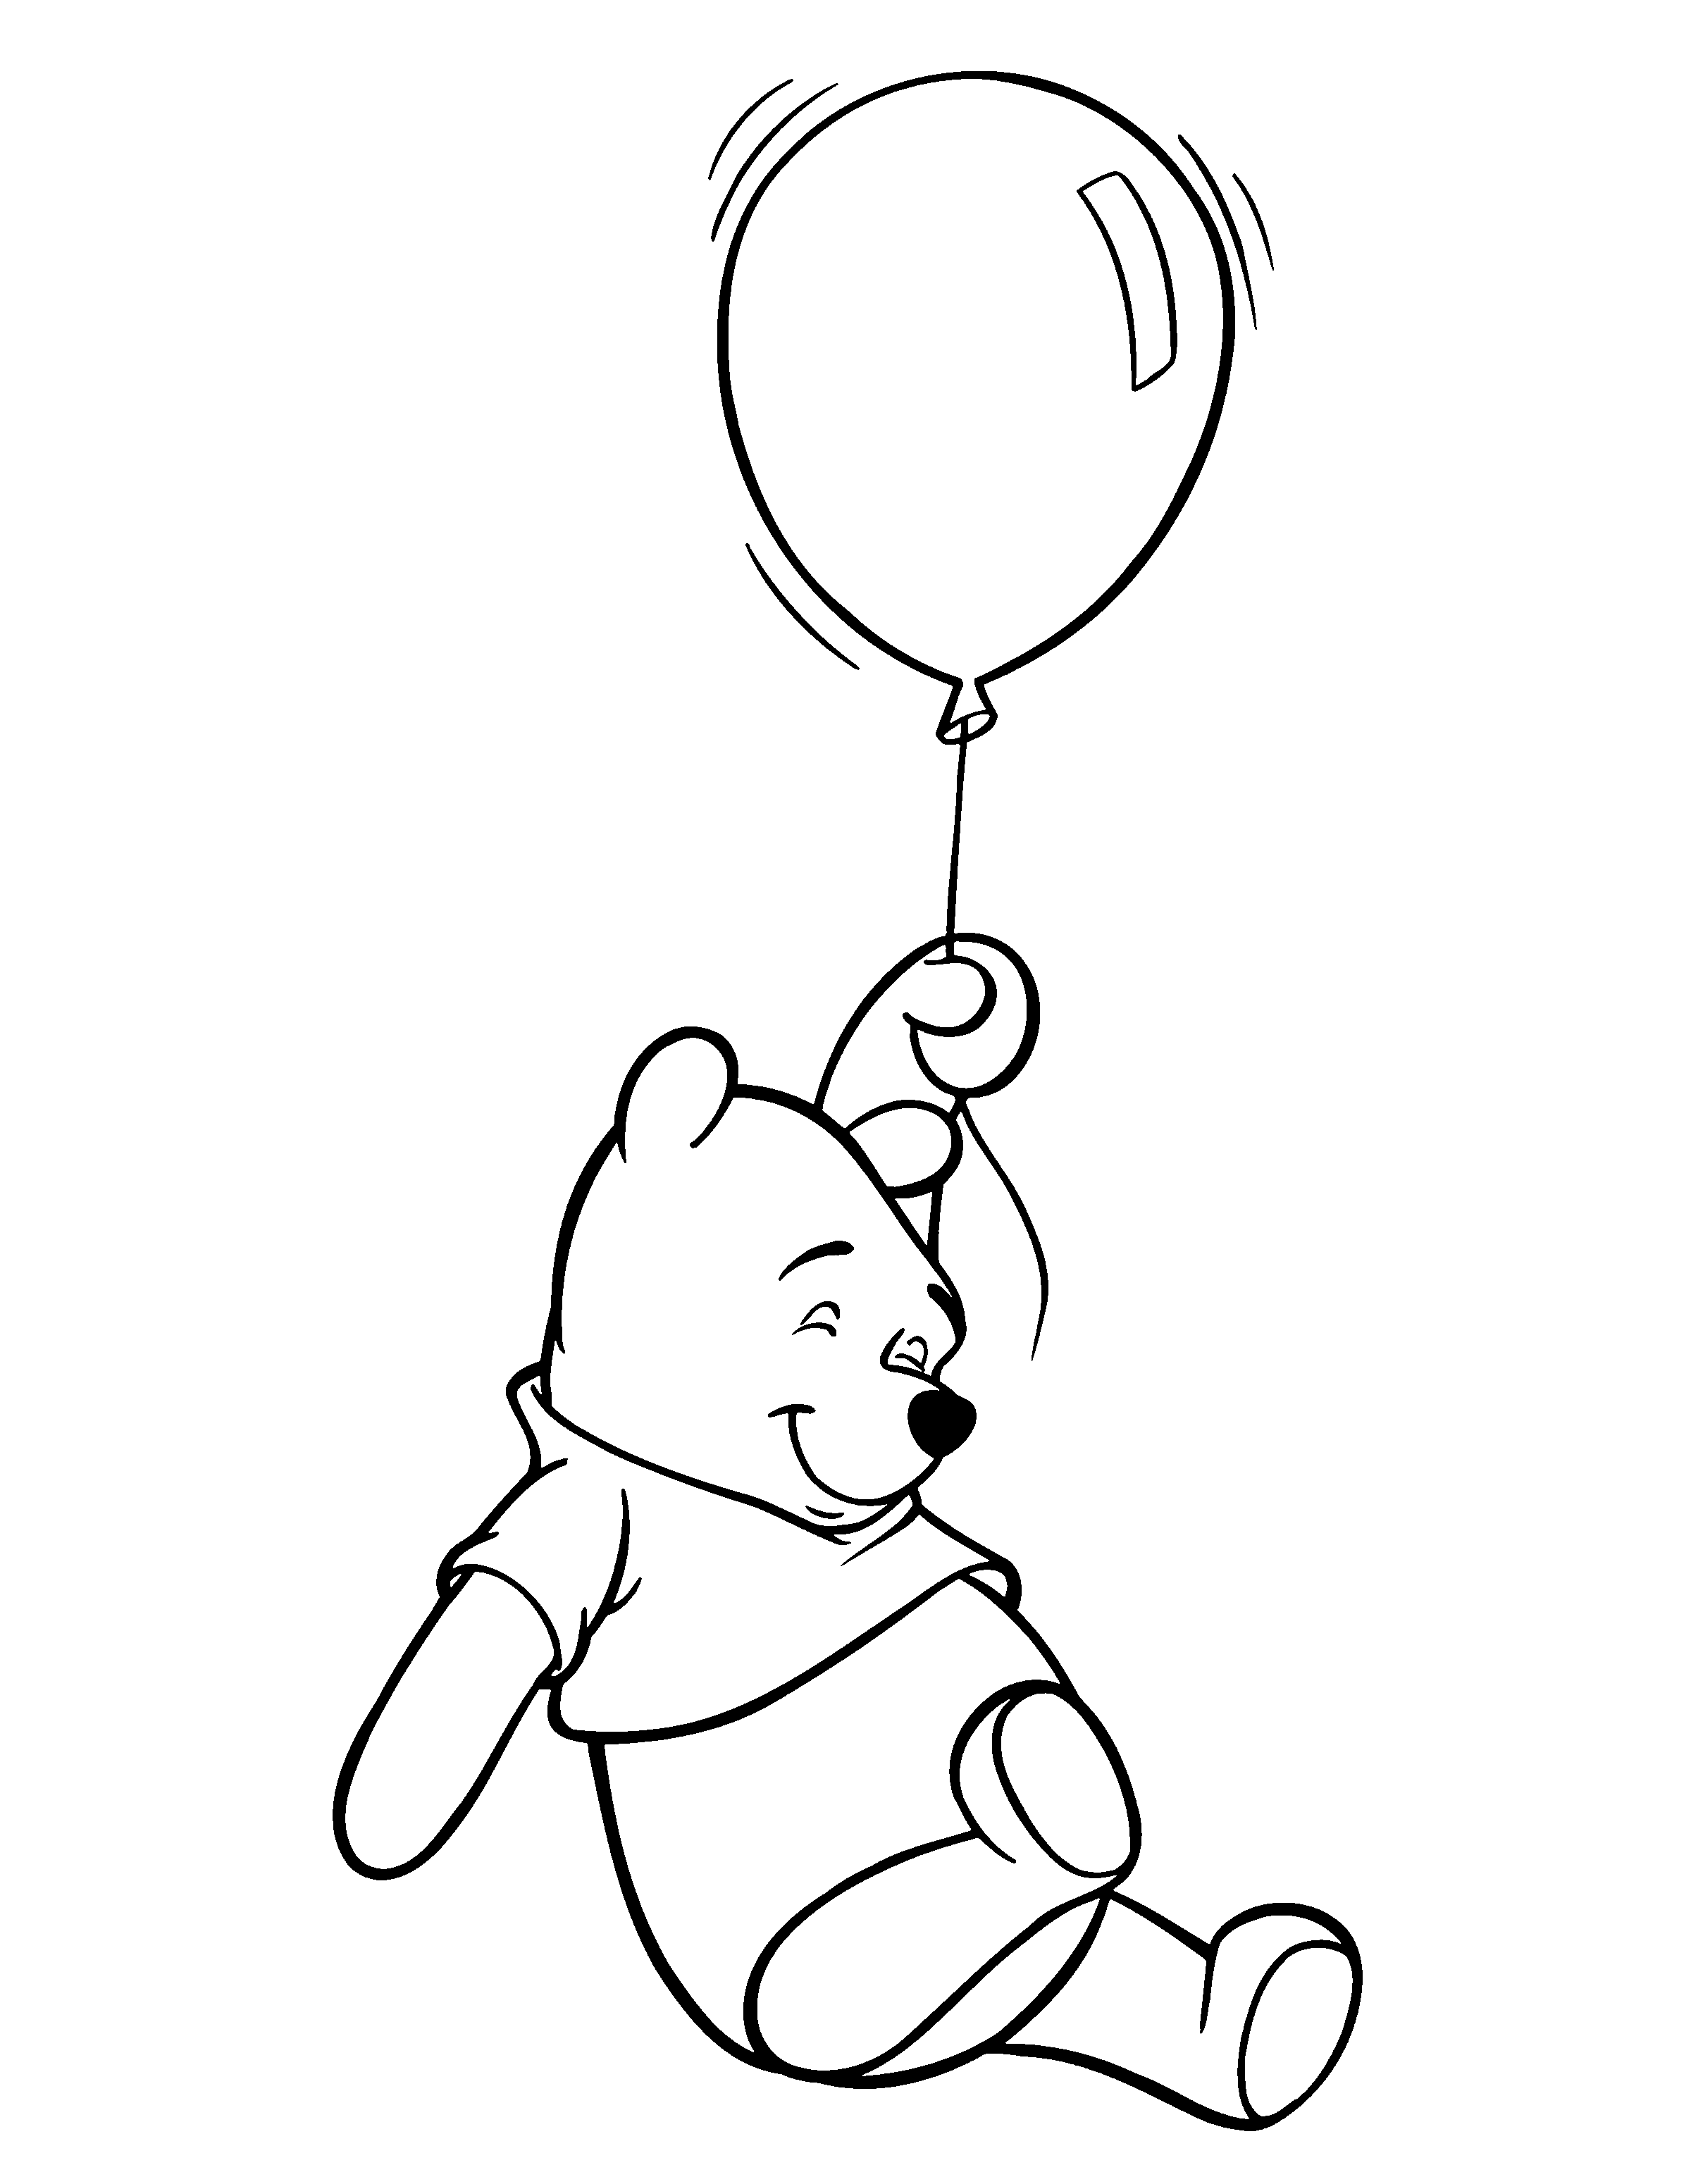 Winnie the pooh Coloring Pages | Coloring Pages | Pinterest ...